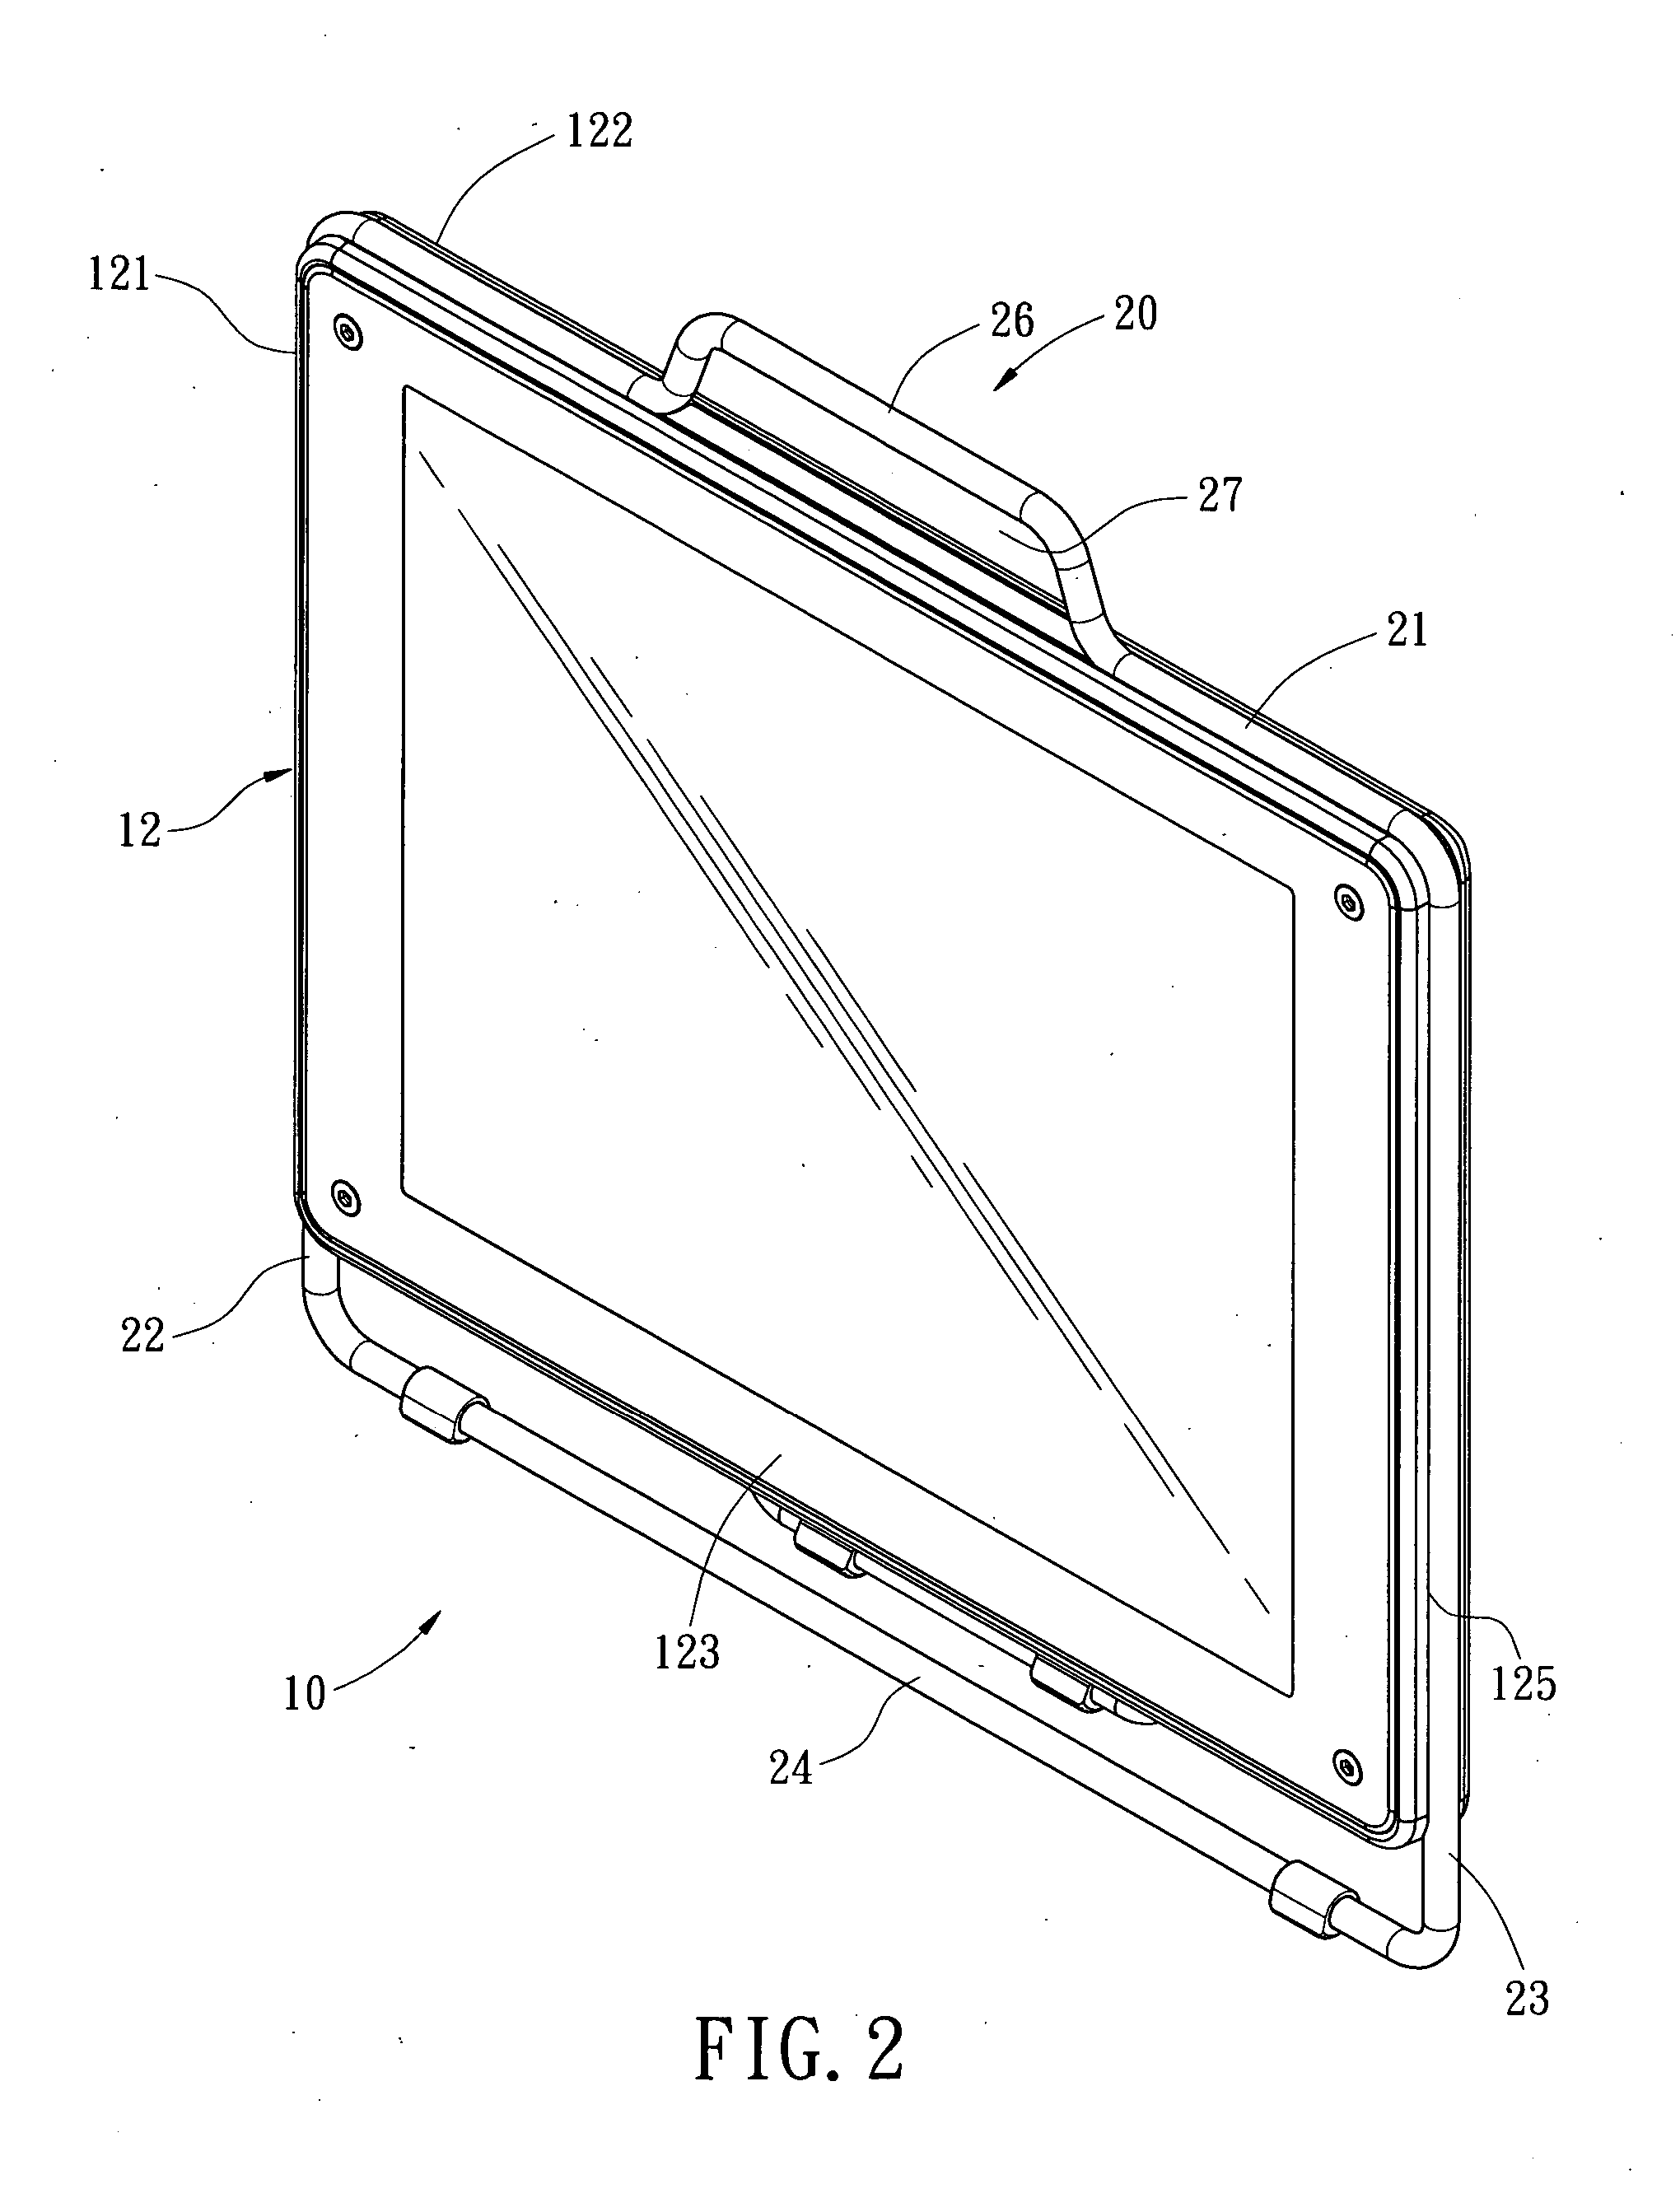 Monitor frame with integrated handle structure